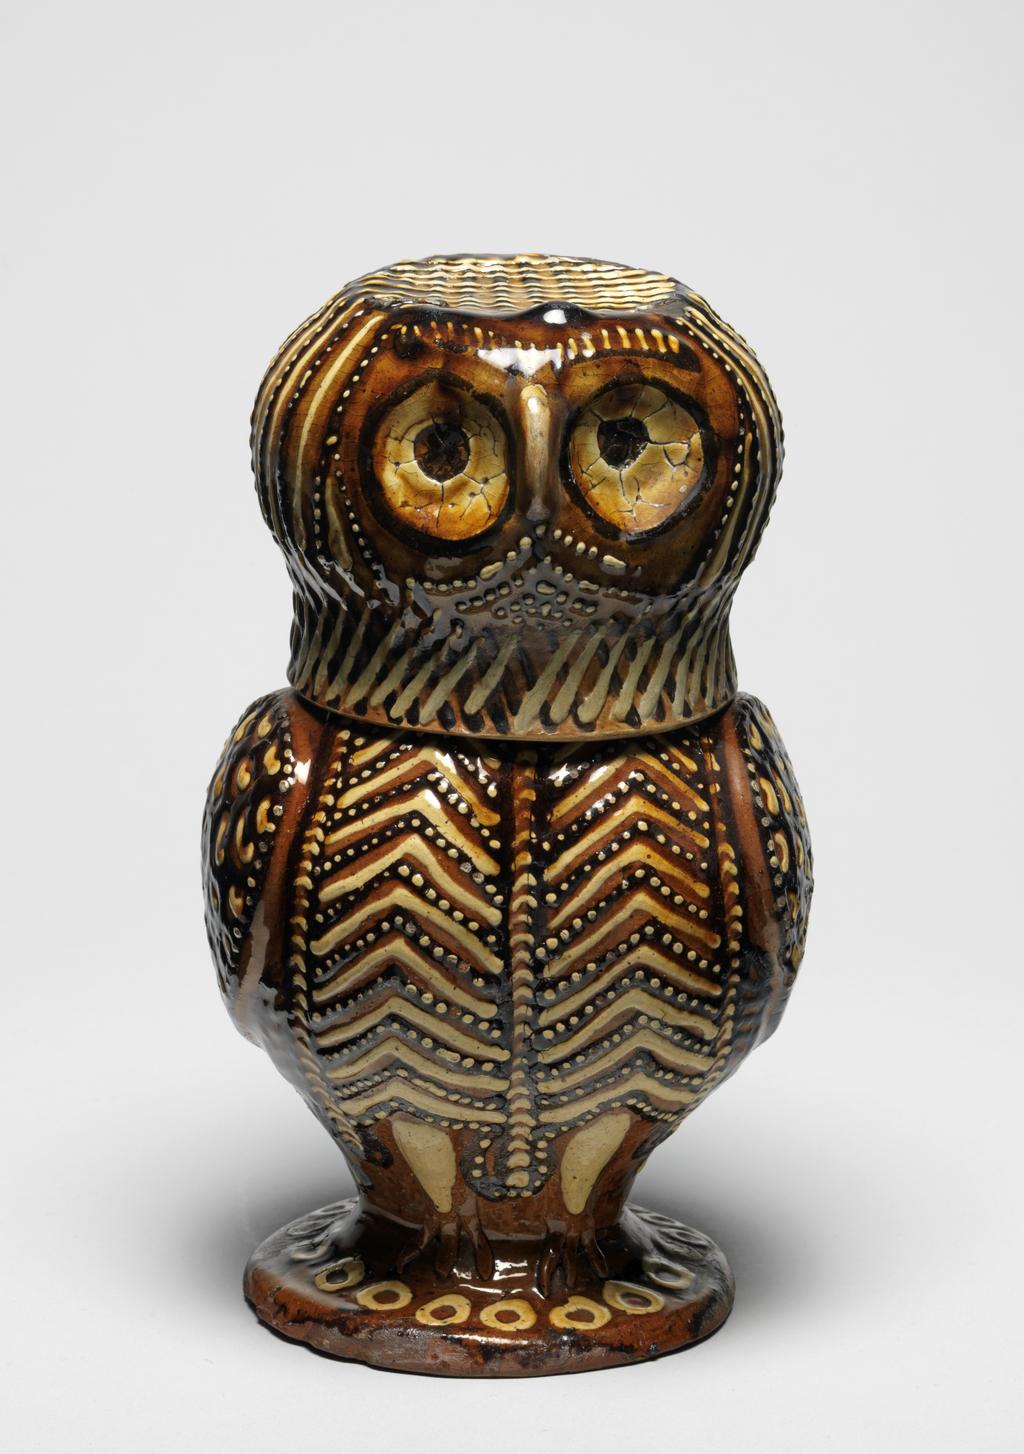 An image of Owl Jug. Lead-glazed earthenware, thrown in two parts, decorated with slip-trailing in two shades of brown and white slip, height 22.4 cm, circa 1680-1700. Staffordshire, England.